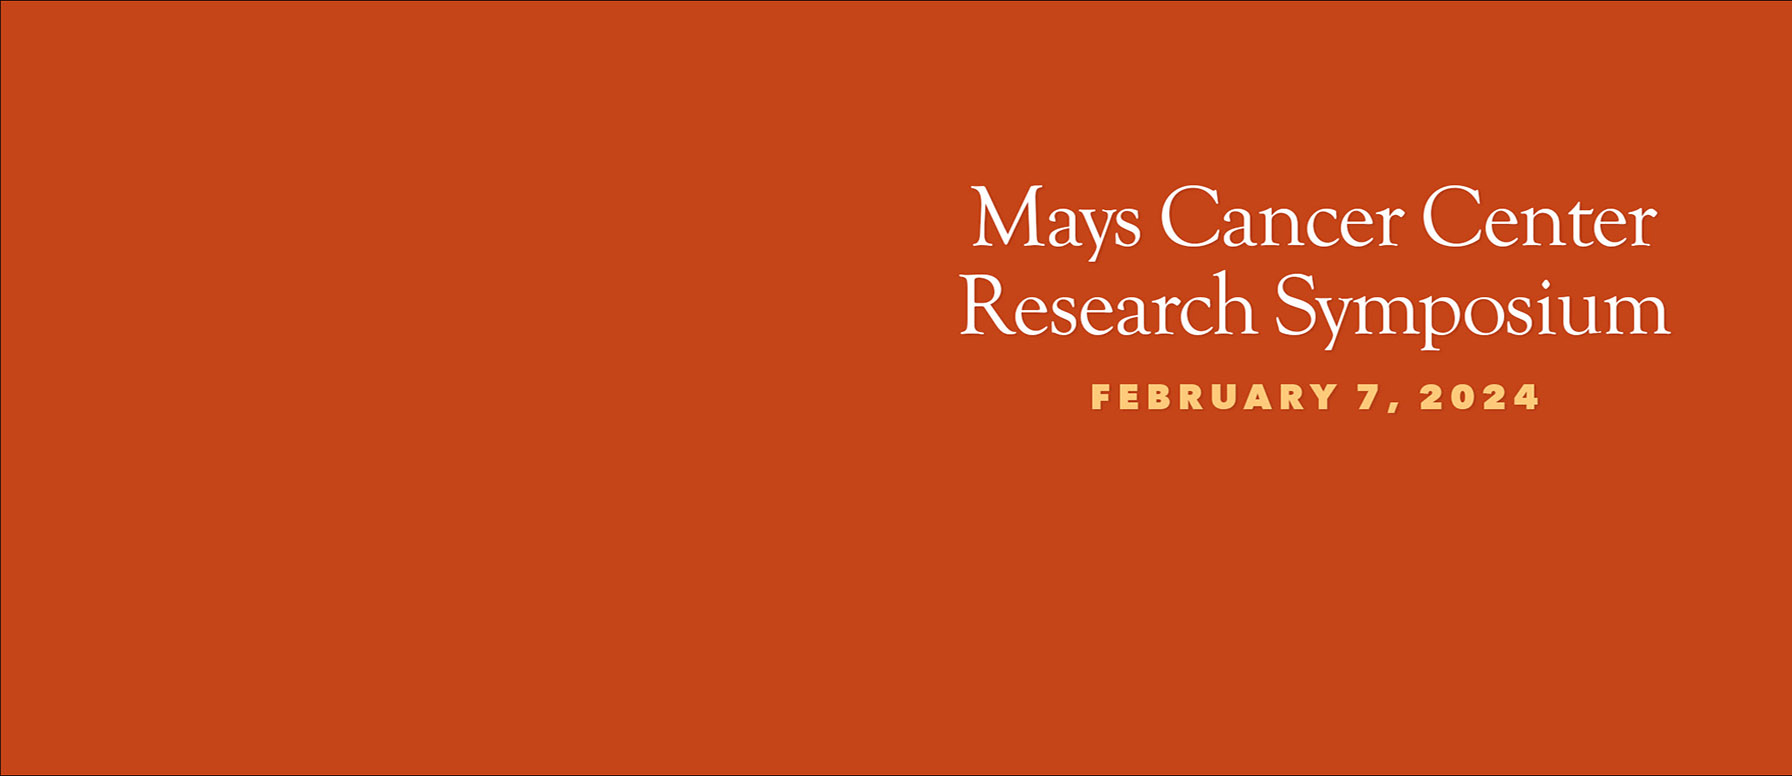 a banner that says "Mays Cancer Center Research Symposium February 7, 2024"